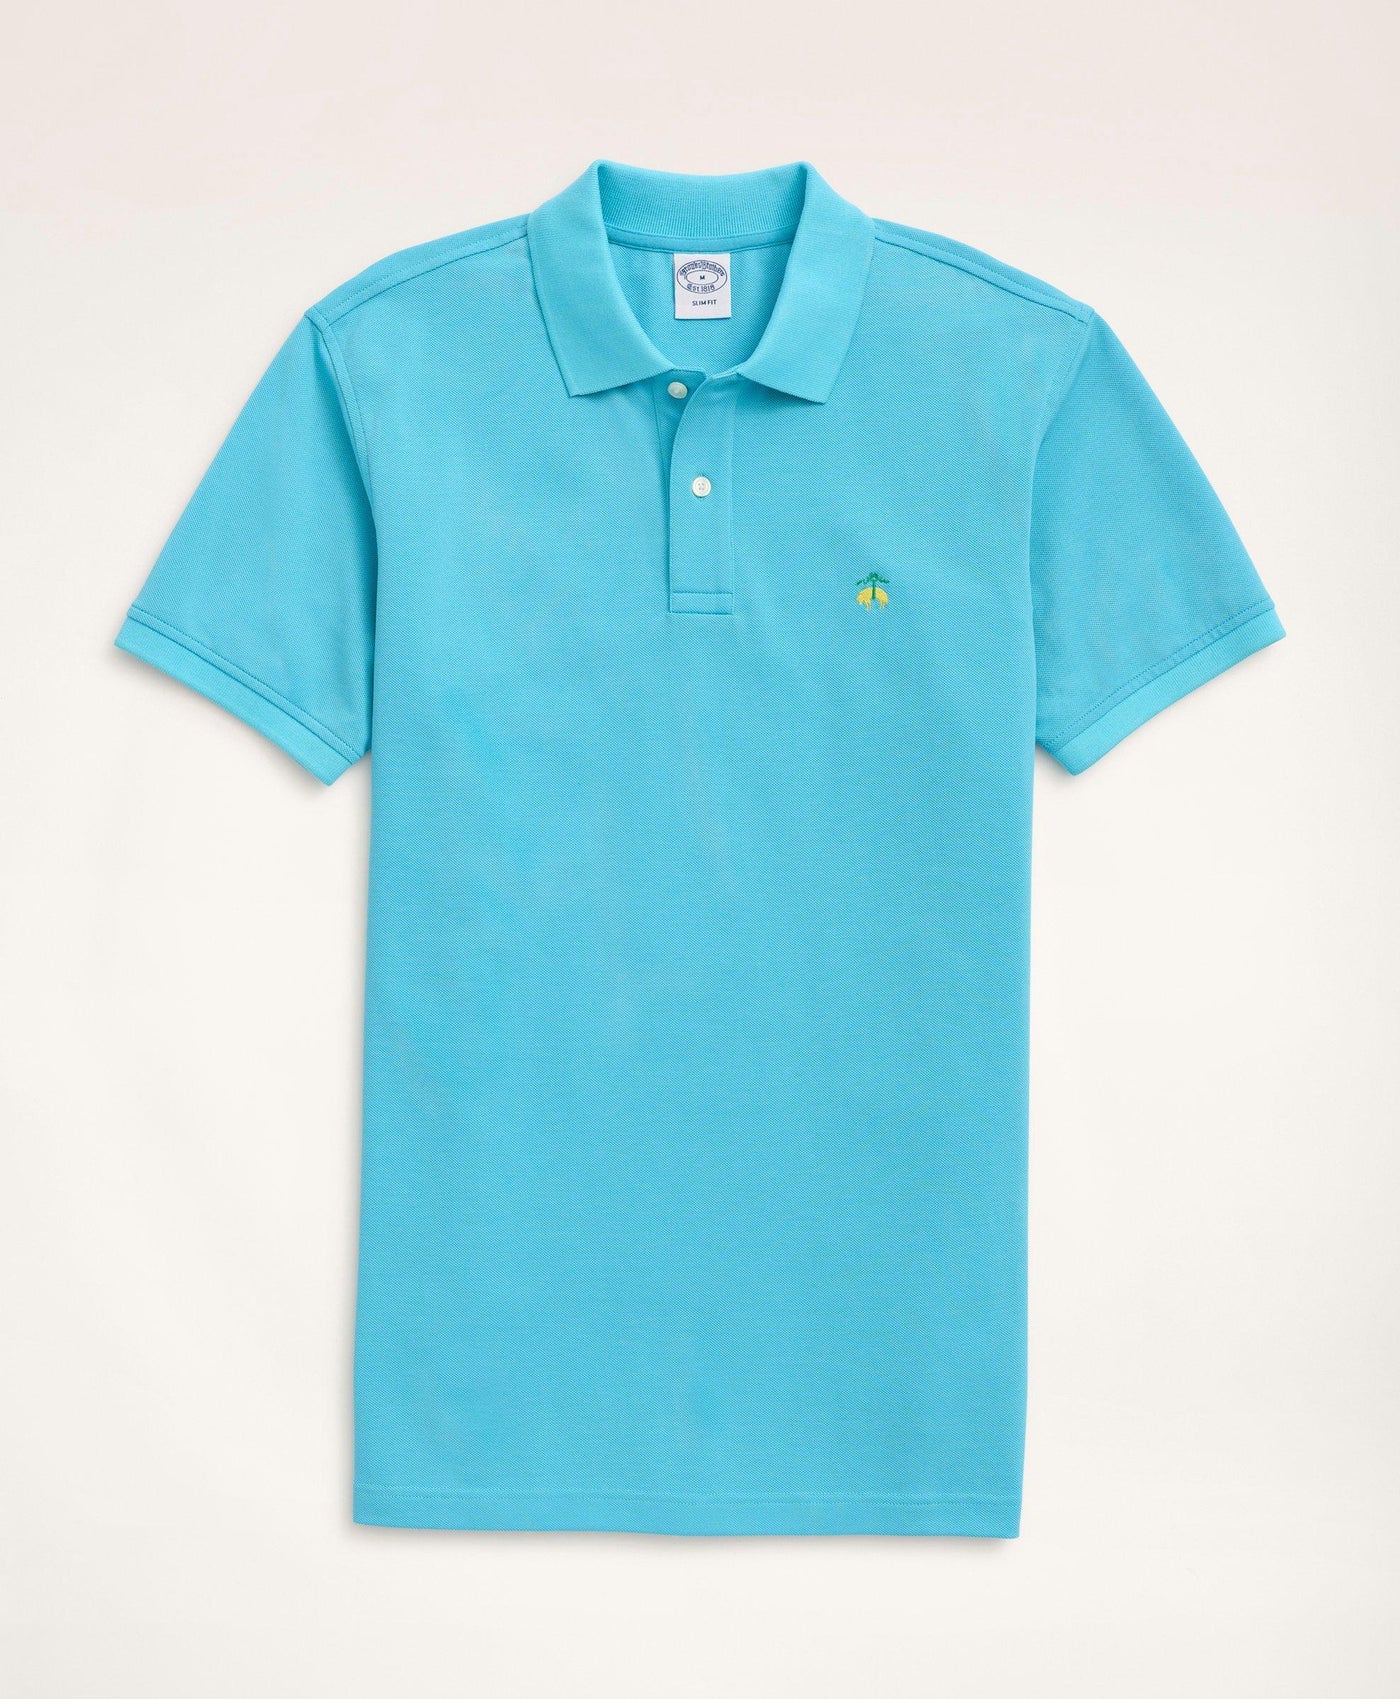 Golden Fleece Slim-Fit Washed Stretch Supima Polo Shirt - Brooks Brothers Canada